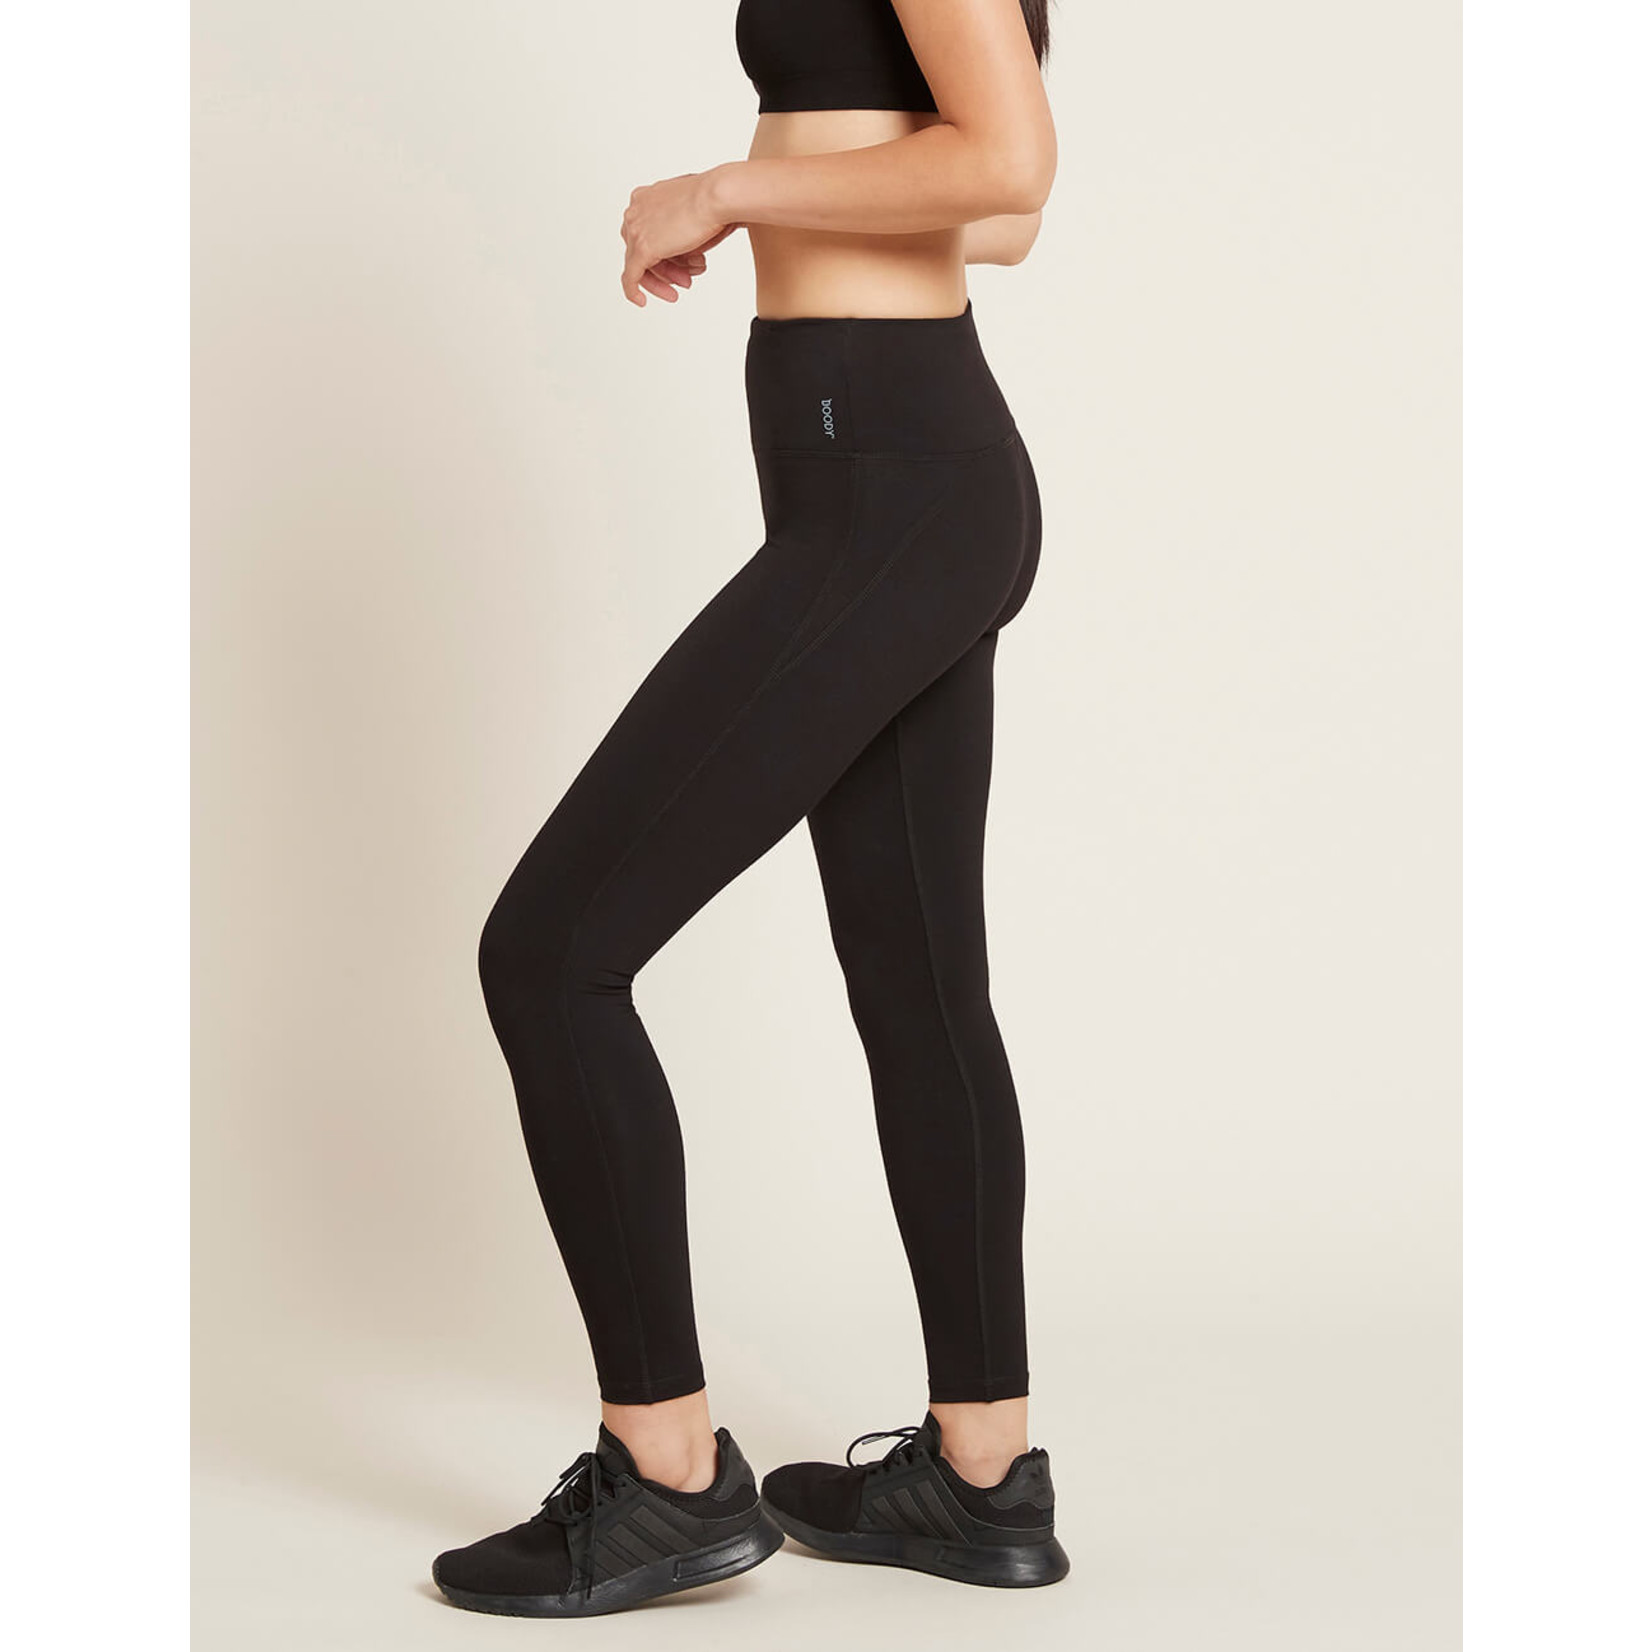 Boody North America Active High Waist Full Length Legging with Pockets